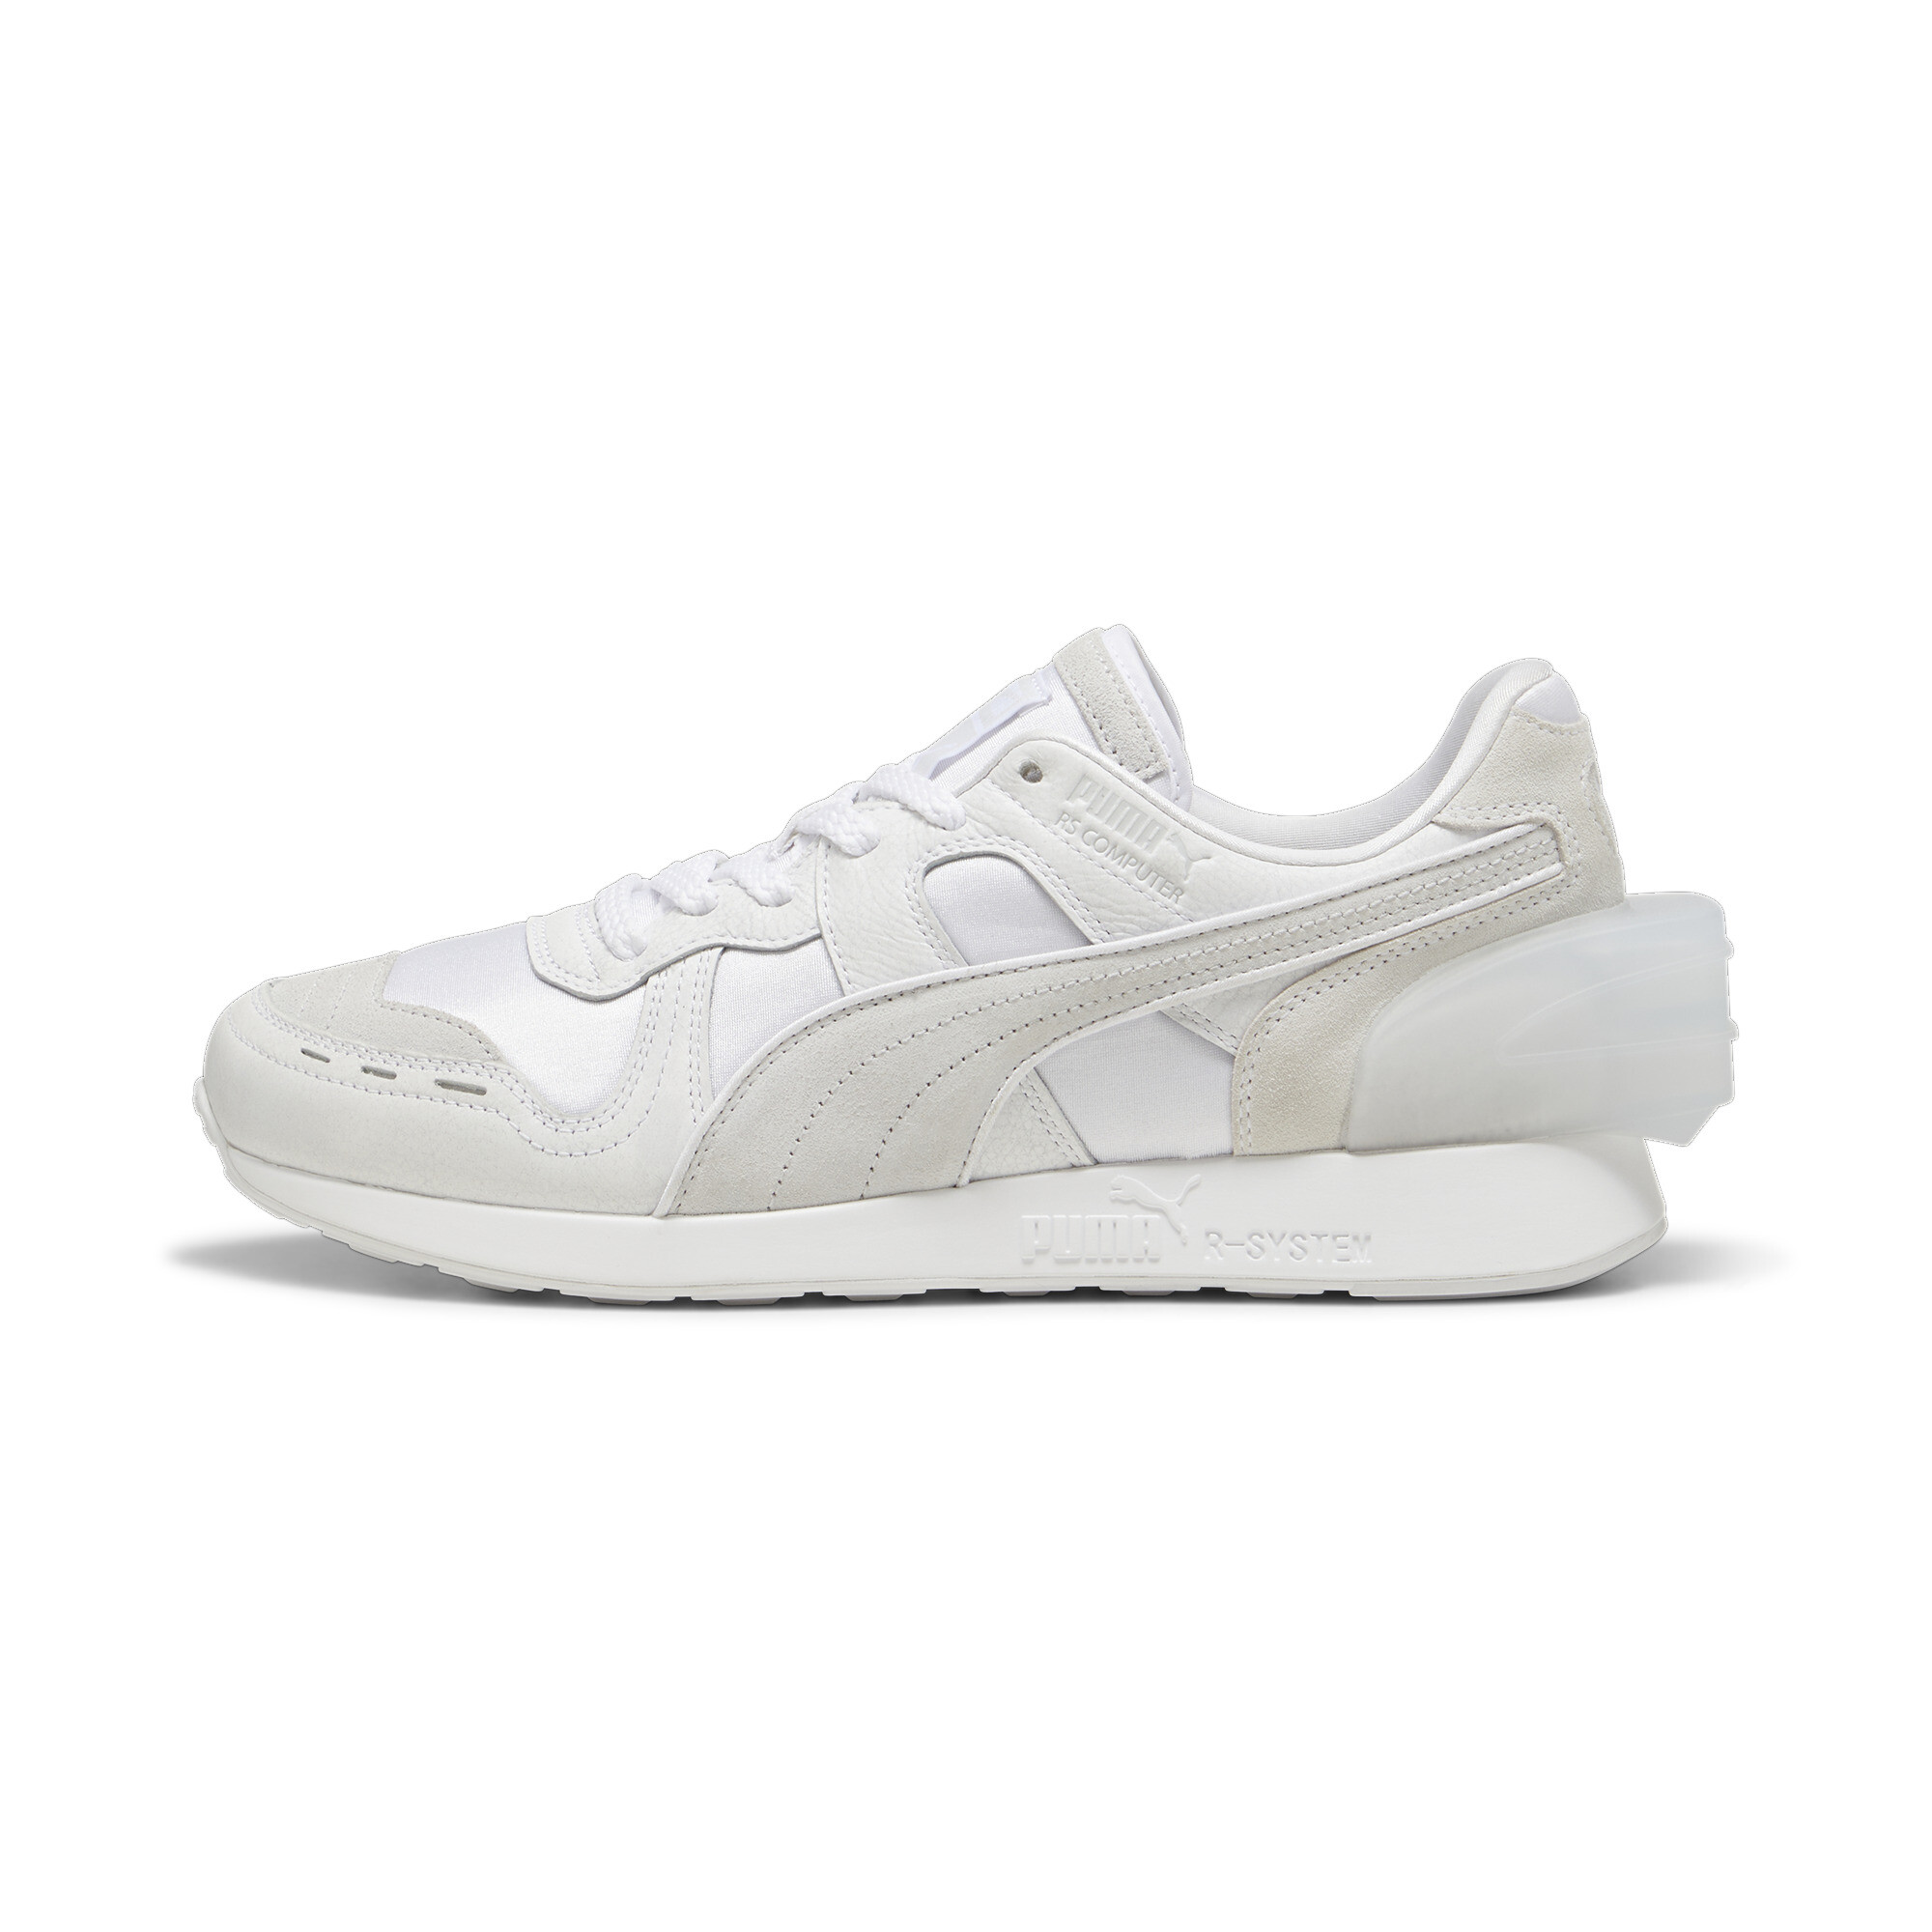 Puma RS-100 40th Anniversary Sneakers, White, Size 38.5, Shoes